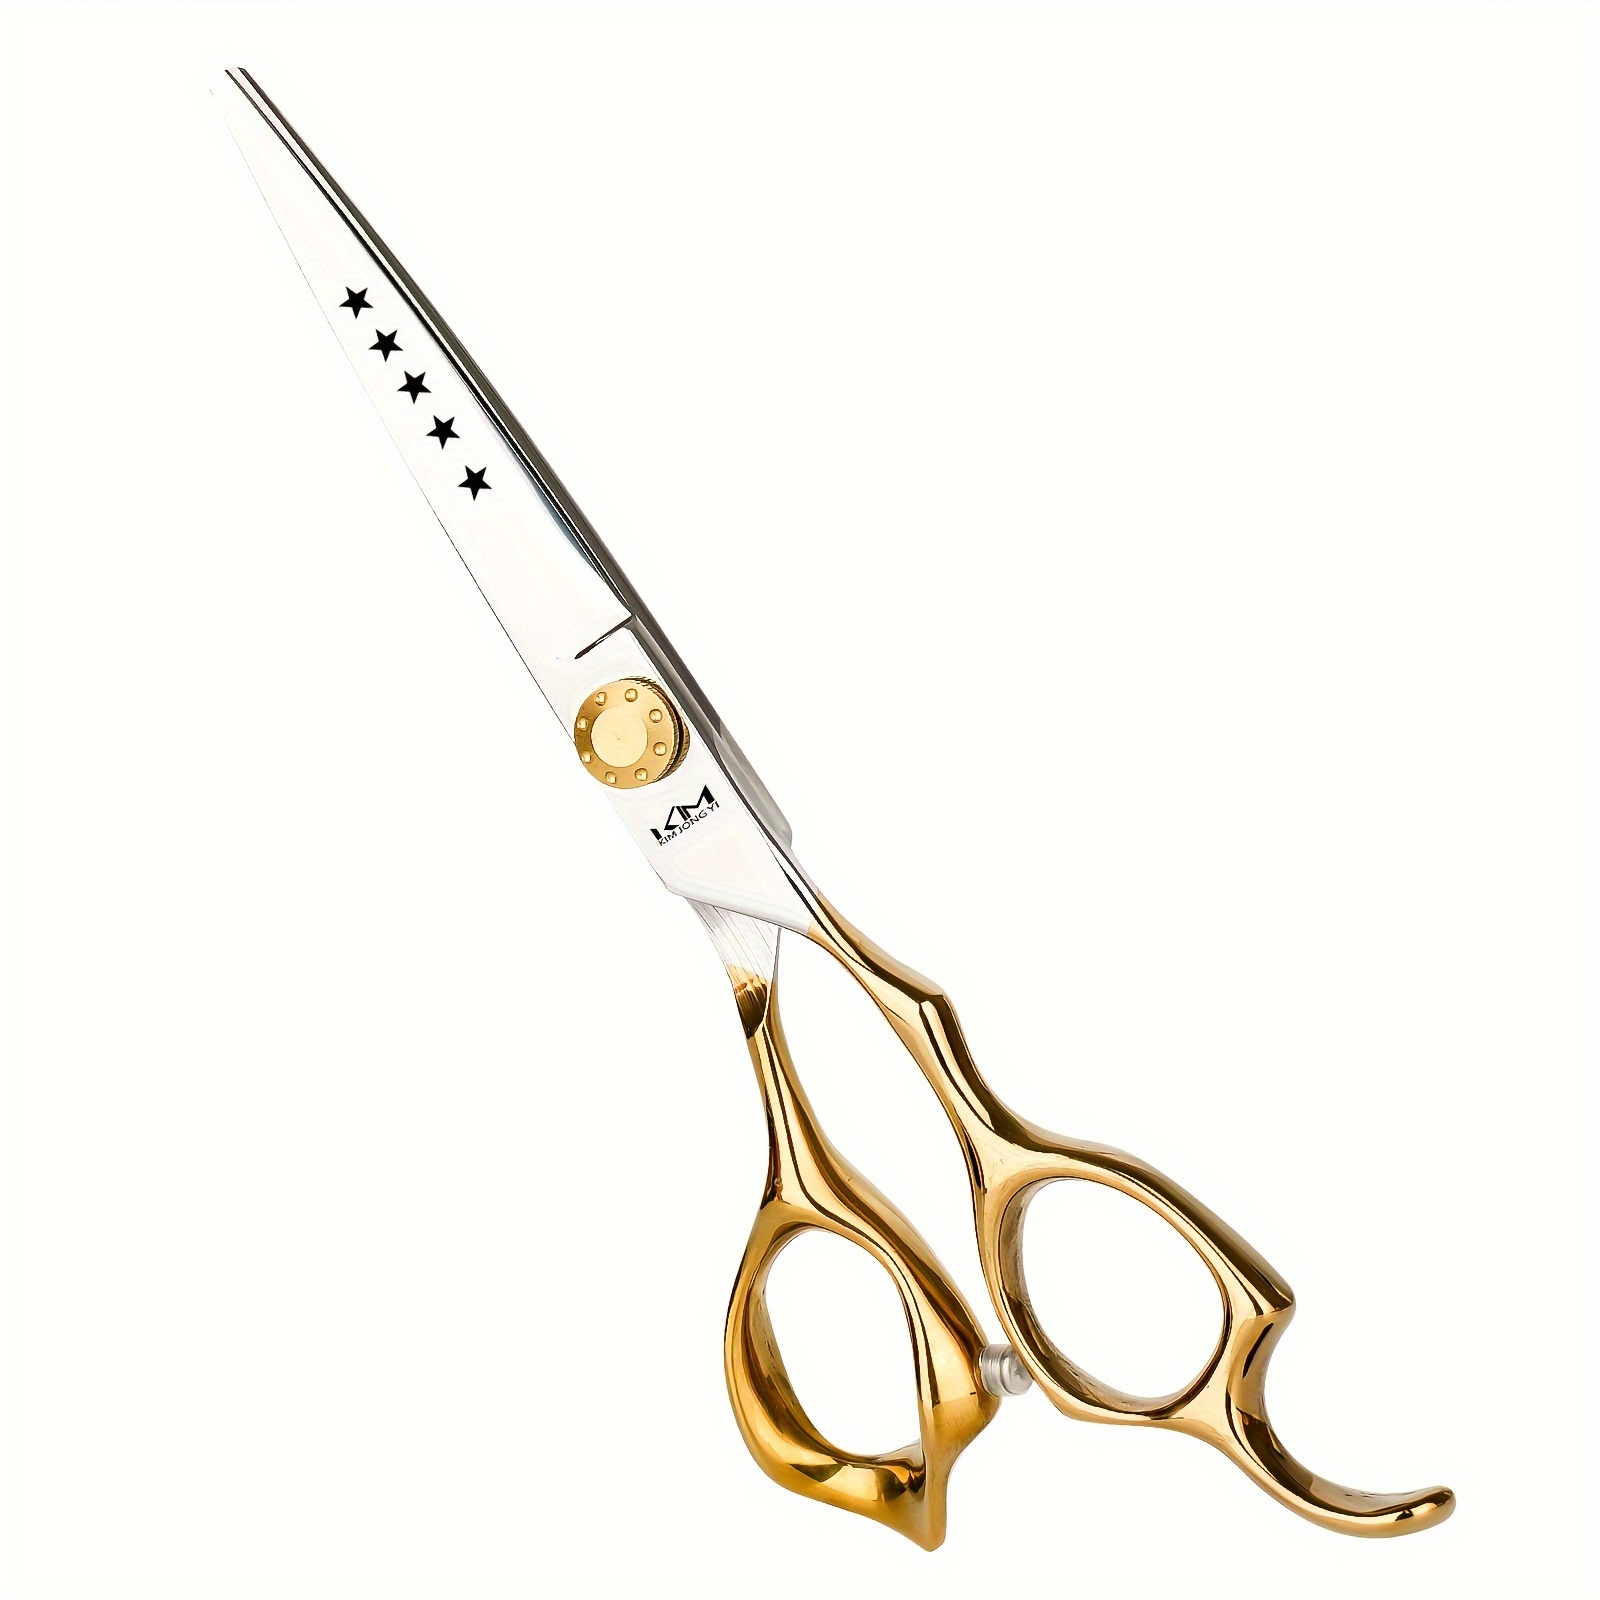 

Kim 6.5 Inch Professional Hair Shears - Unisex-adult Right Hand Texturizing Scissors With Razor Sharp Stainless Steel Blades For Enhancing, Suitable For Salon Hairdressers And Home Use